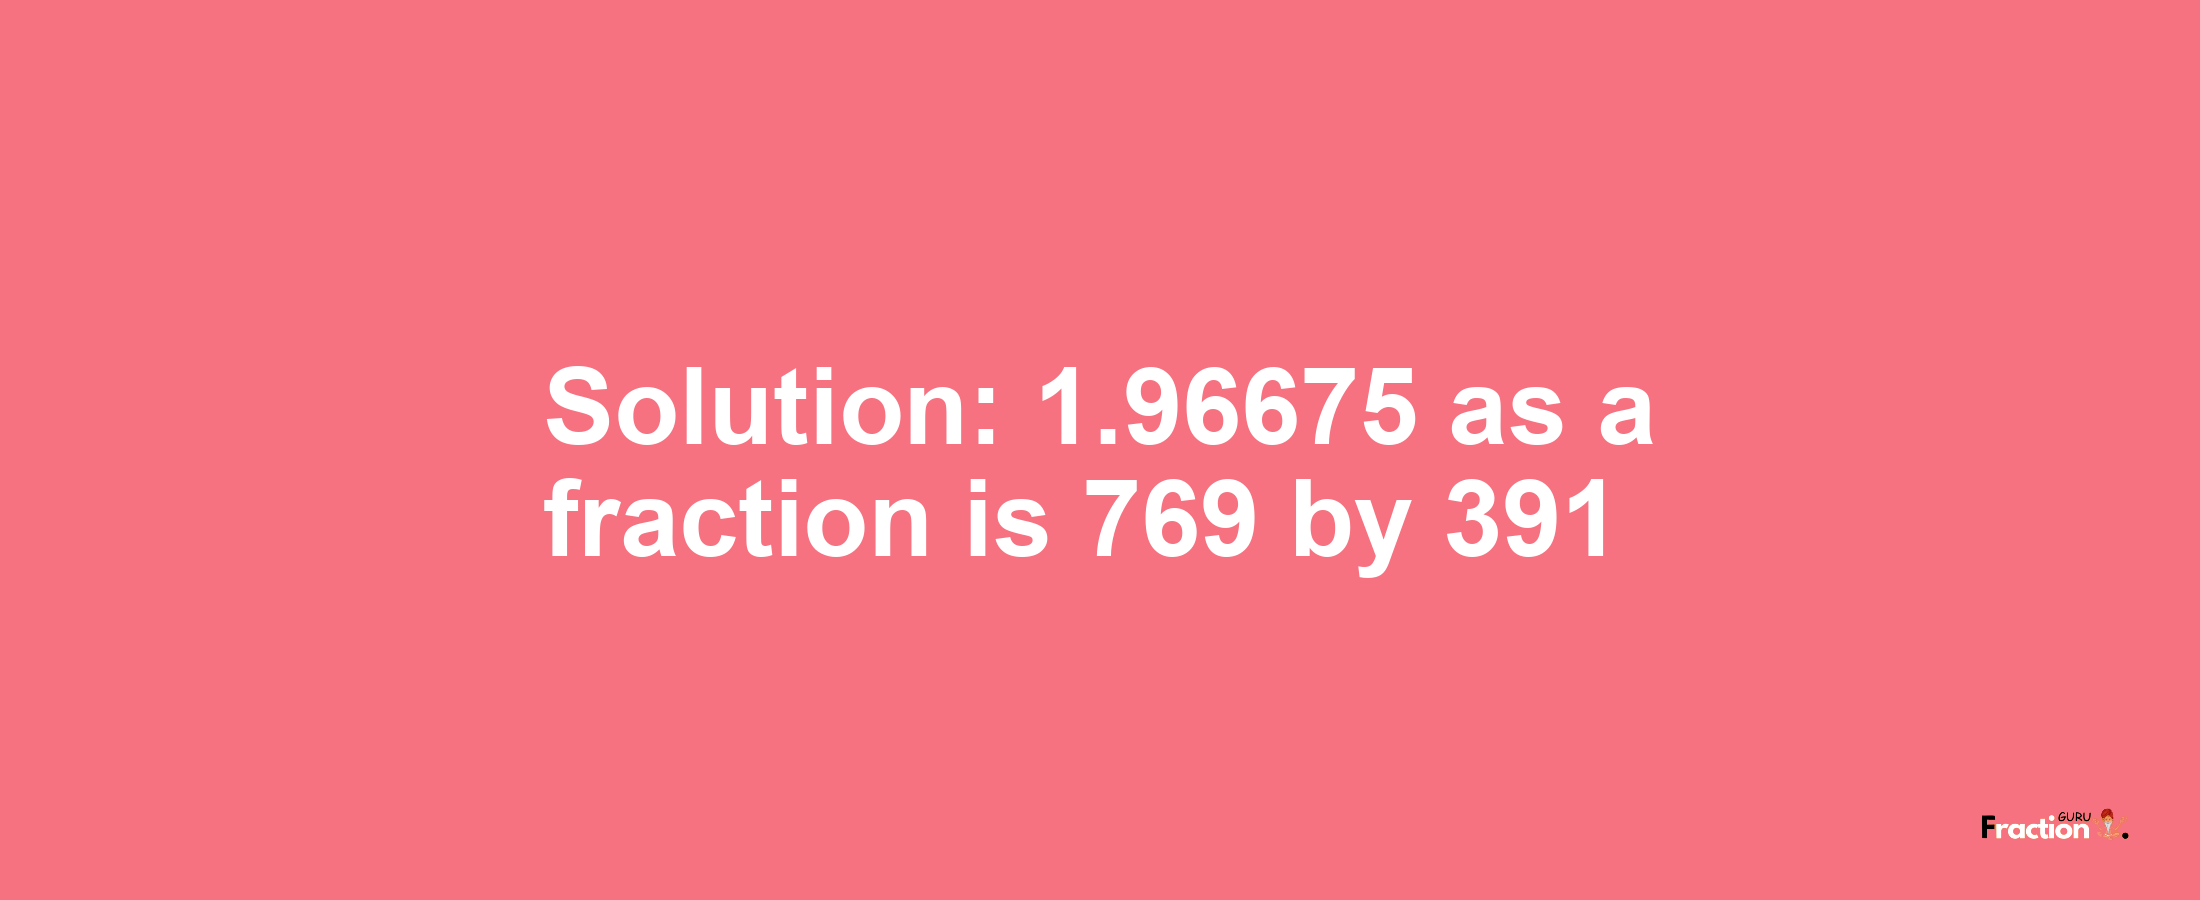 Solution:1.96675 as a fraction is 769/391